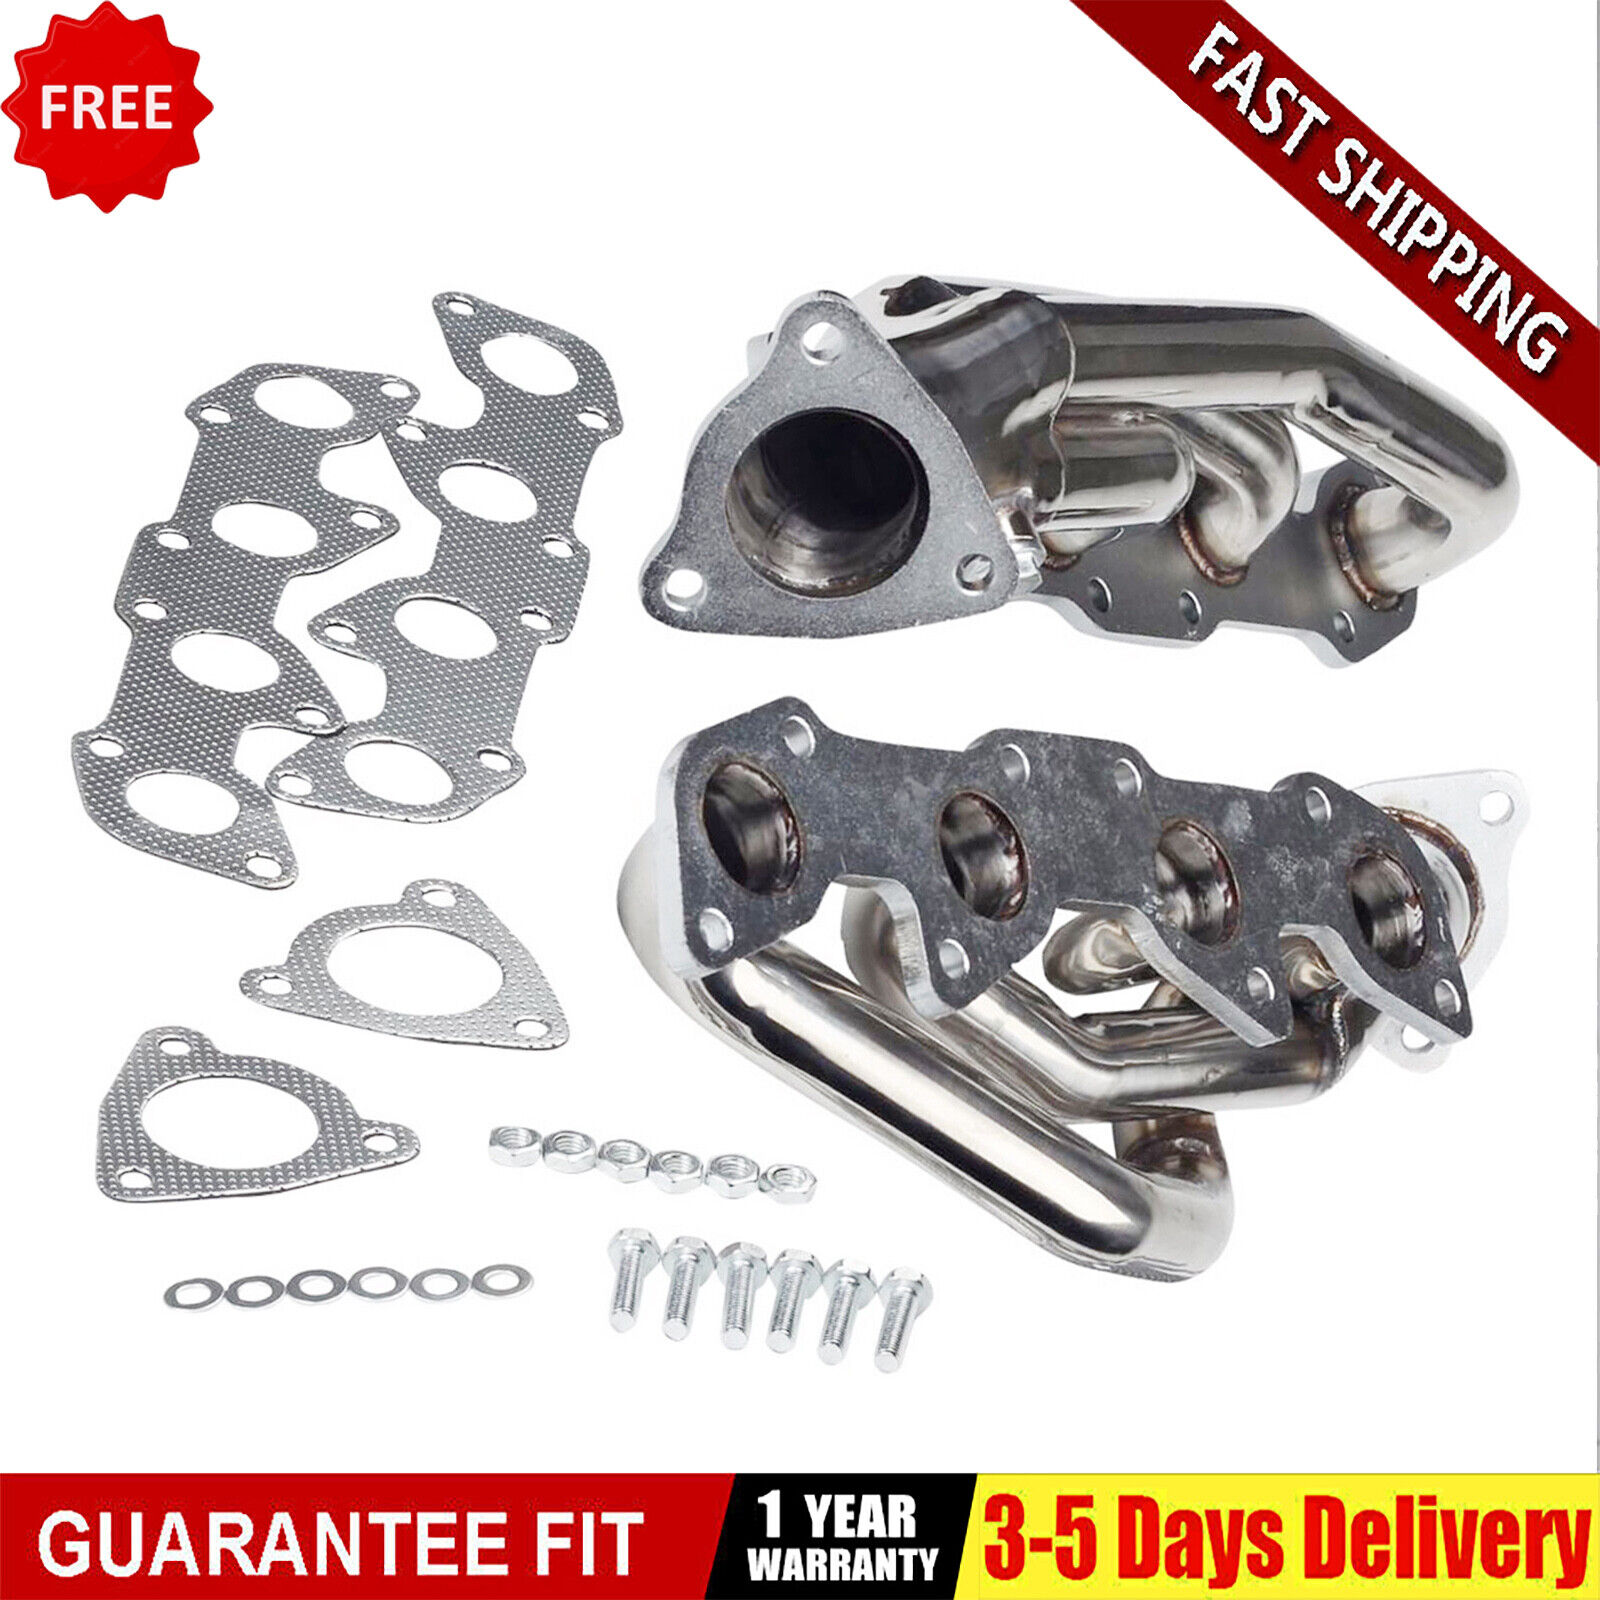 Pair Stainless Exhaust Header Kit Manifold For Toyota TUNDRA SEQUOIA 4.7L V8 4WD